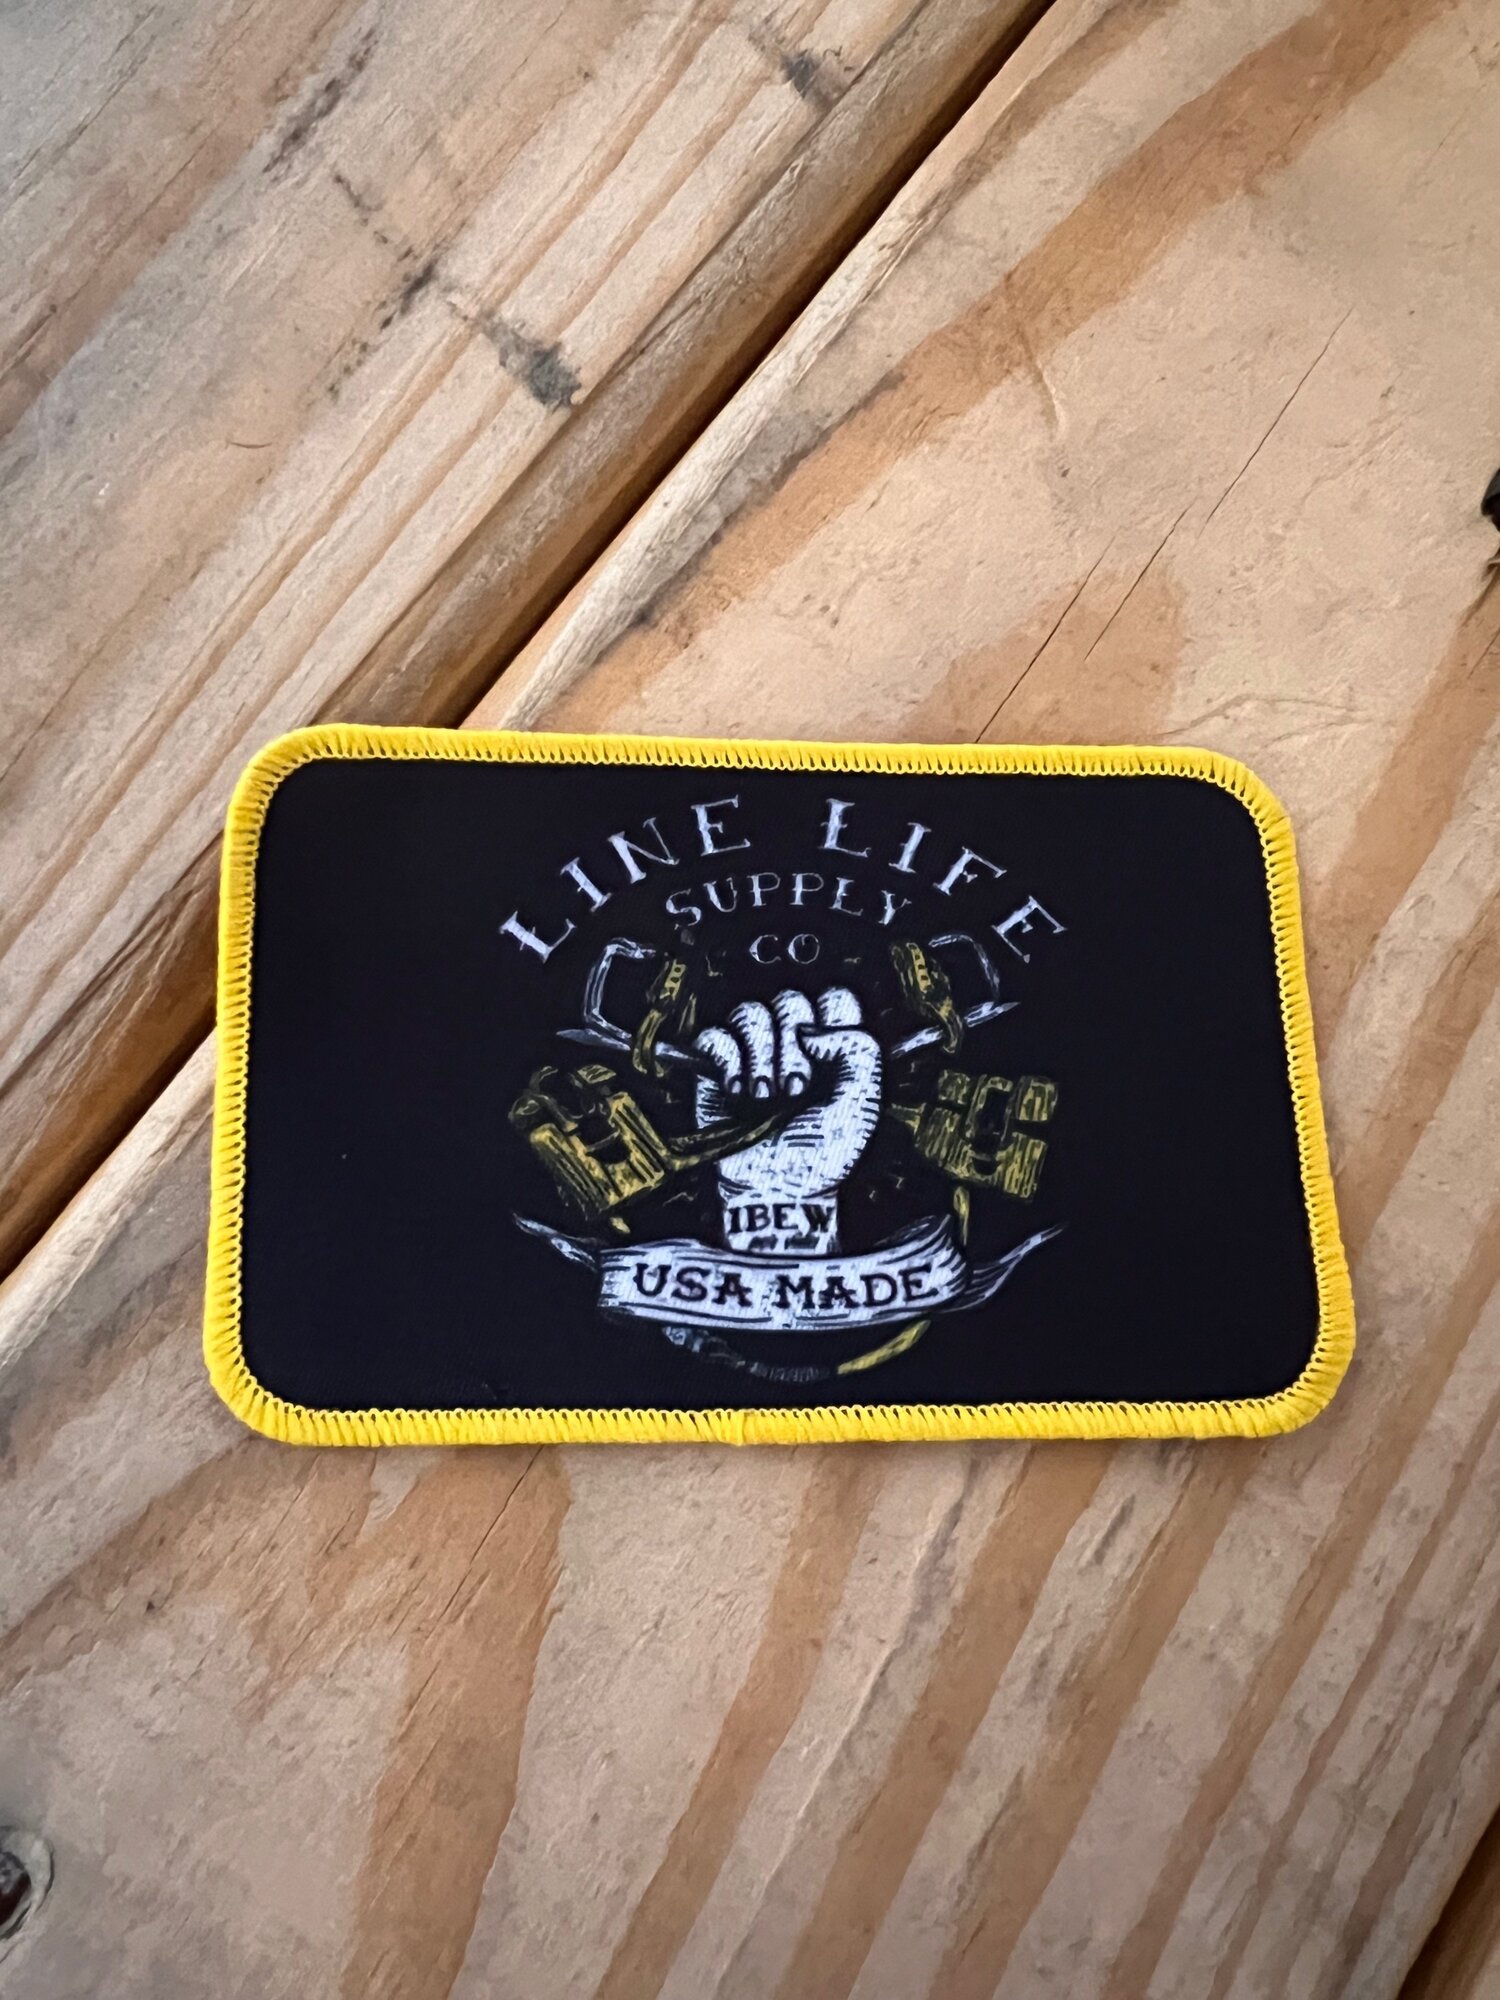 Custom Patches – The Wild Supply Co.